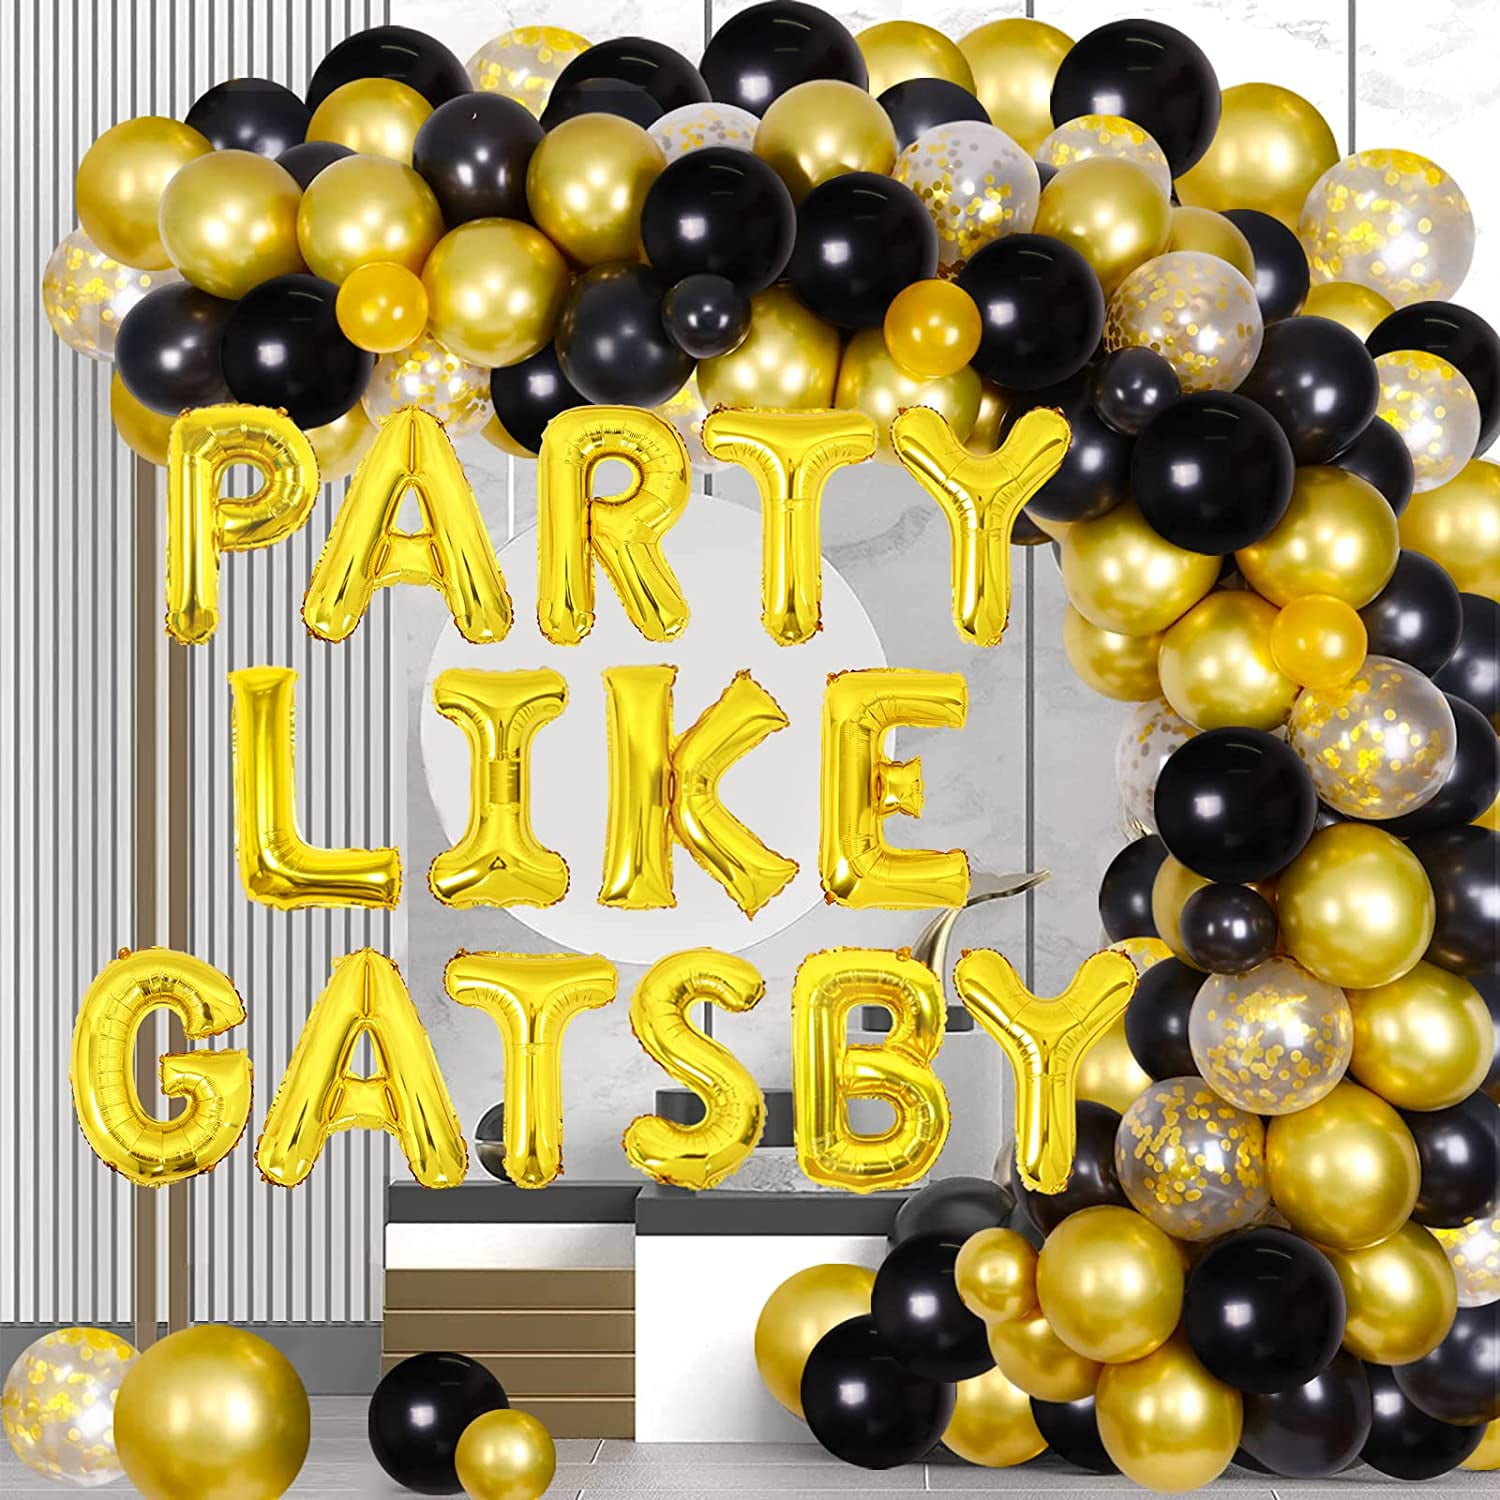 Great Gatsby Party Decorations Party Like Gatsby Balloons Black Gold  Balloon Garland Arch Kit Roaring 20s Party Decorations 